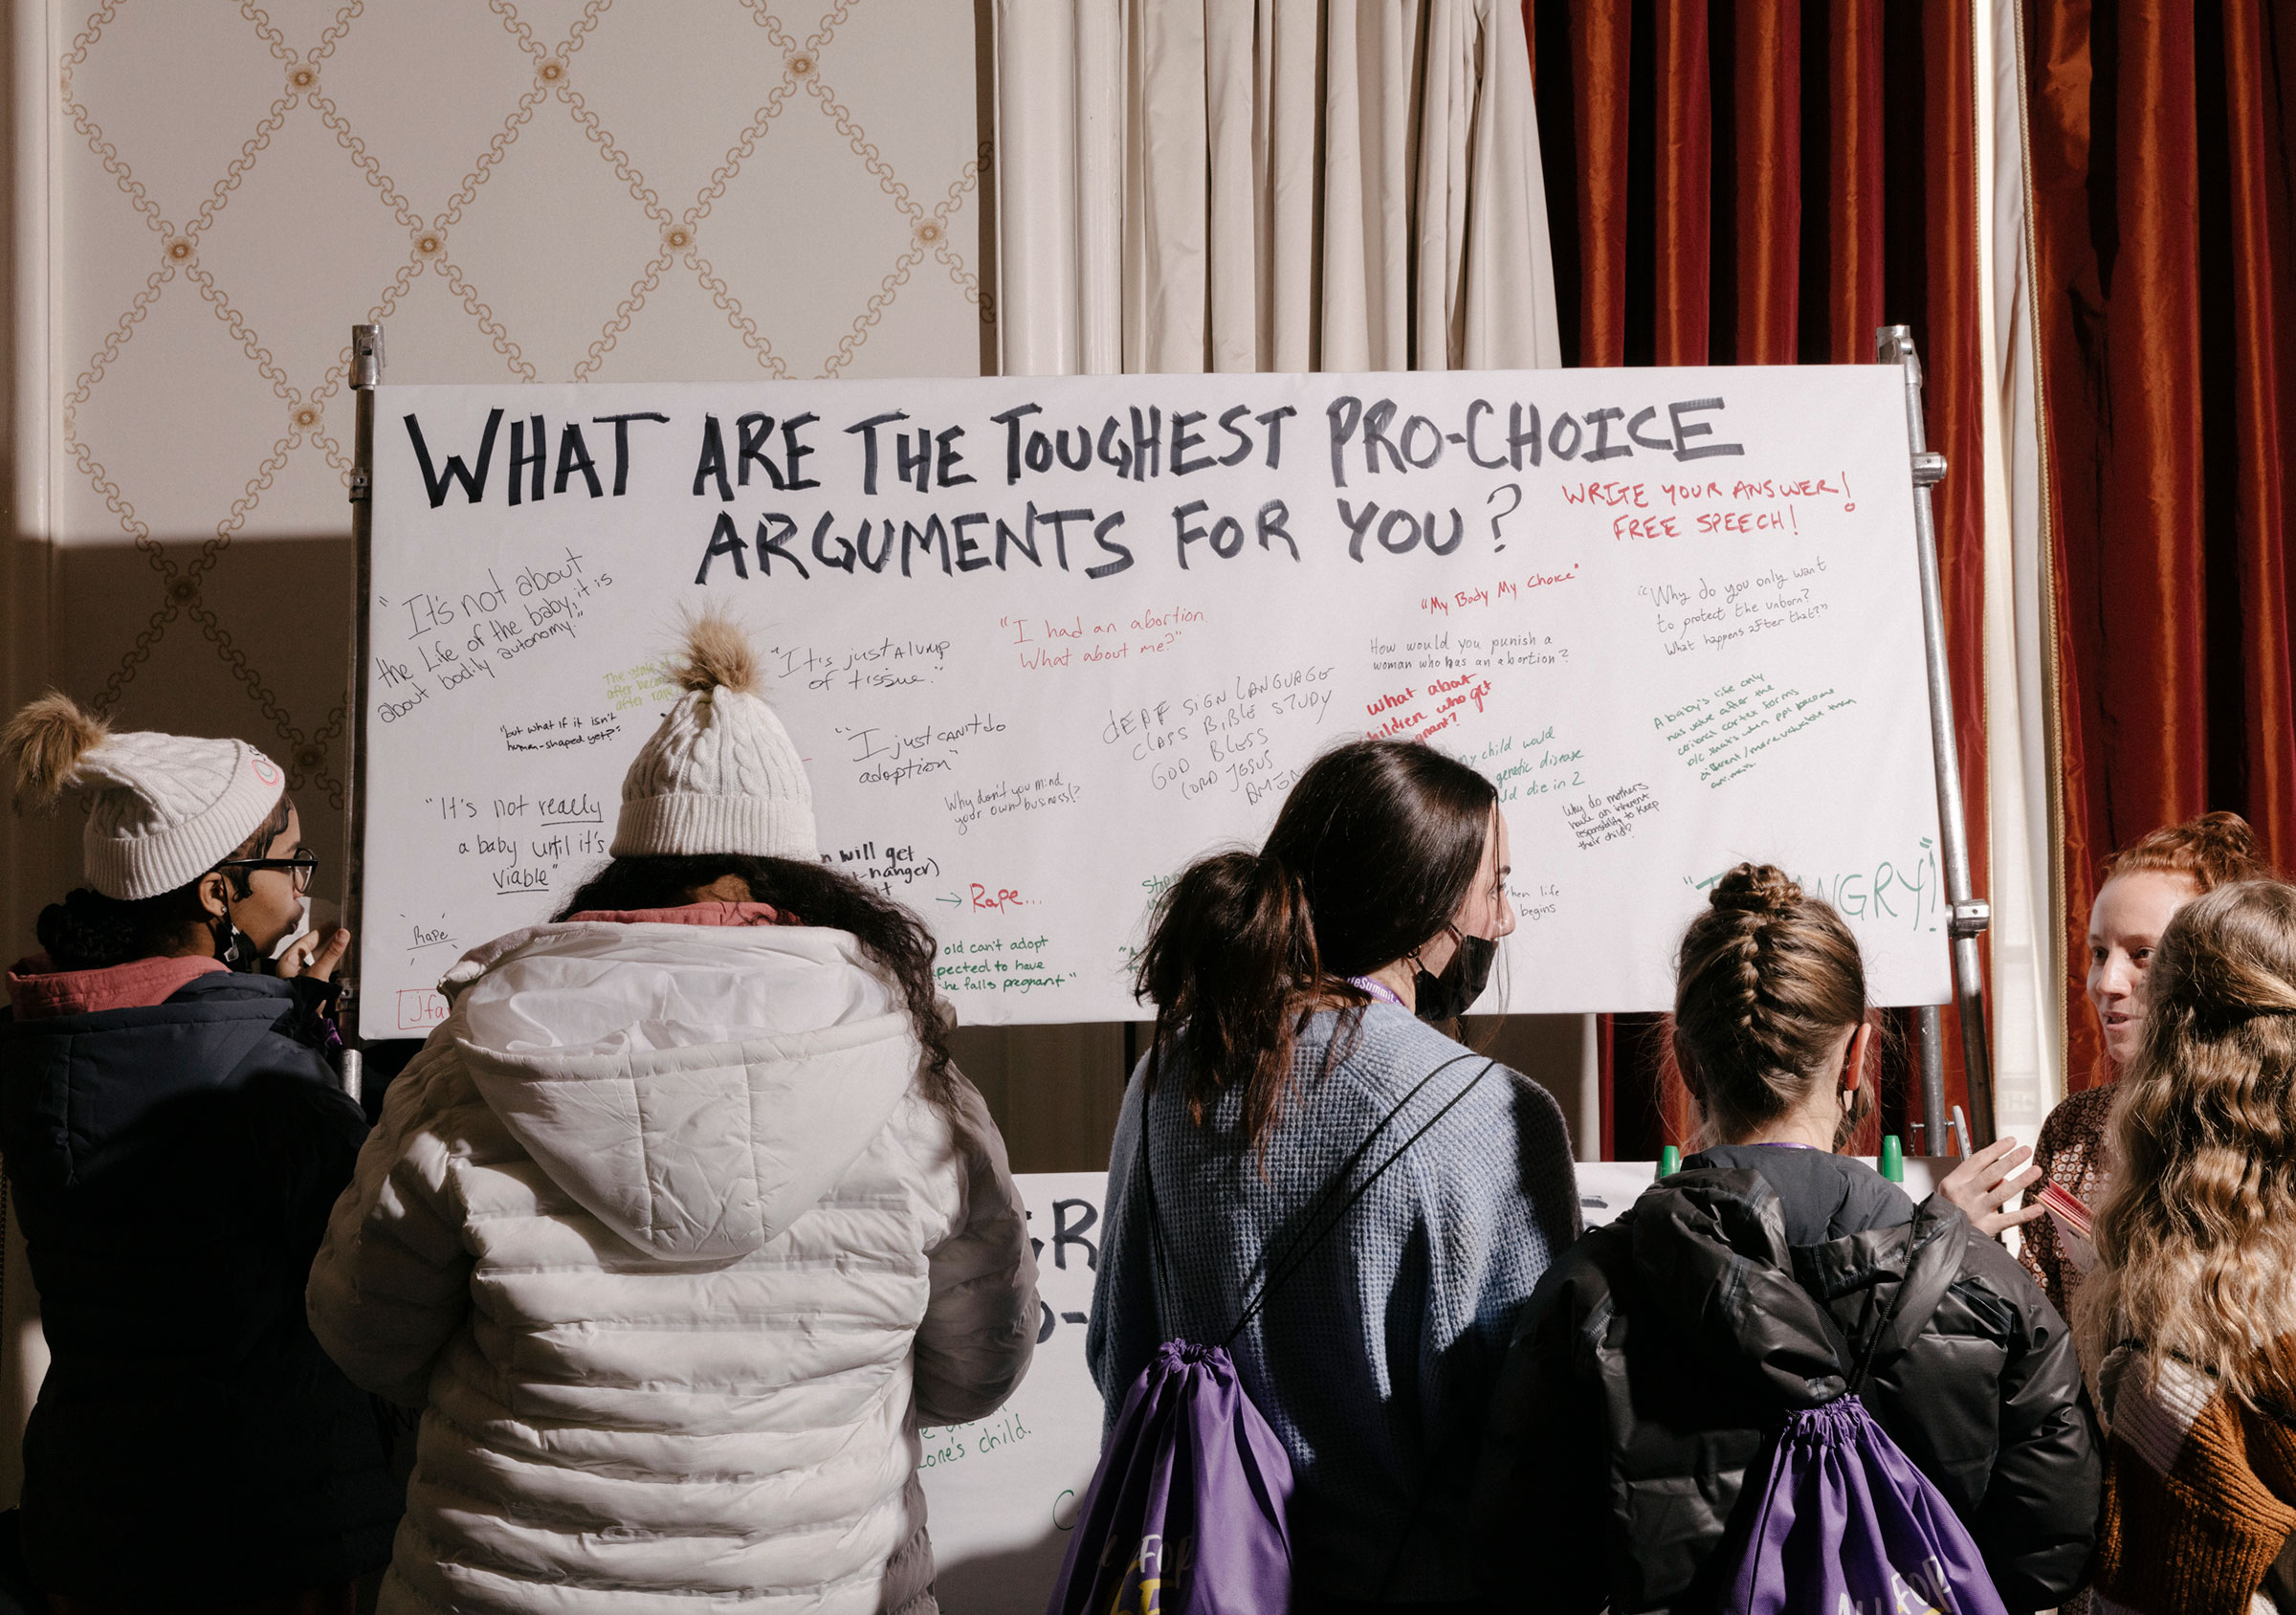 Attendees at the National Pro-Life Summit in Washington participate in writing out what the toughest pro-choice arguments are for them, on Jan. 22. (M. Levy for TIME)